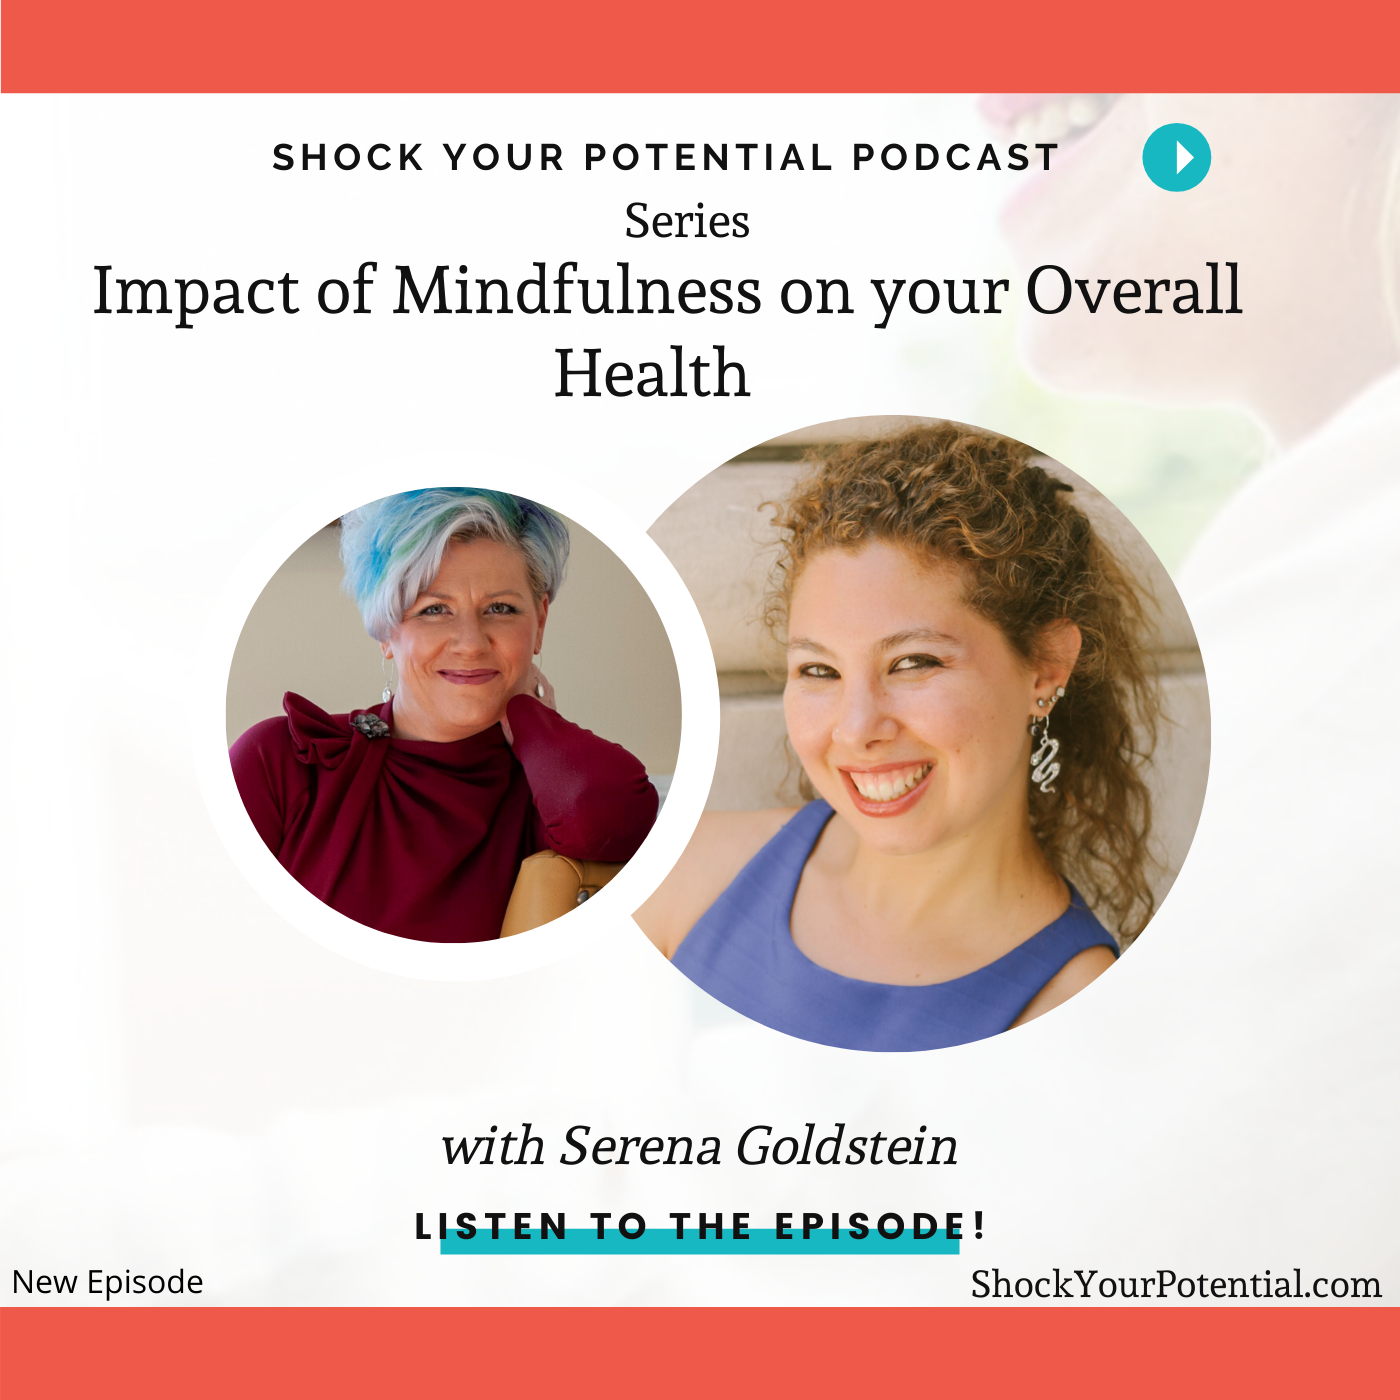 The Impact of Mindfulness on your Overall Health – Dr. Serena Goldstein